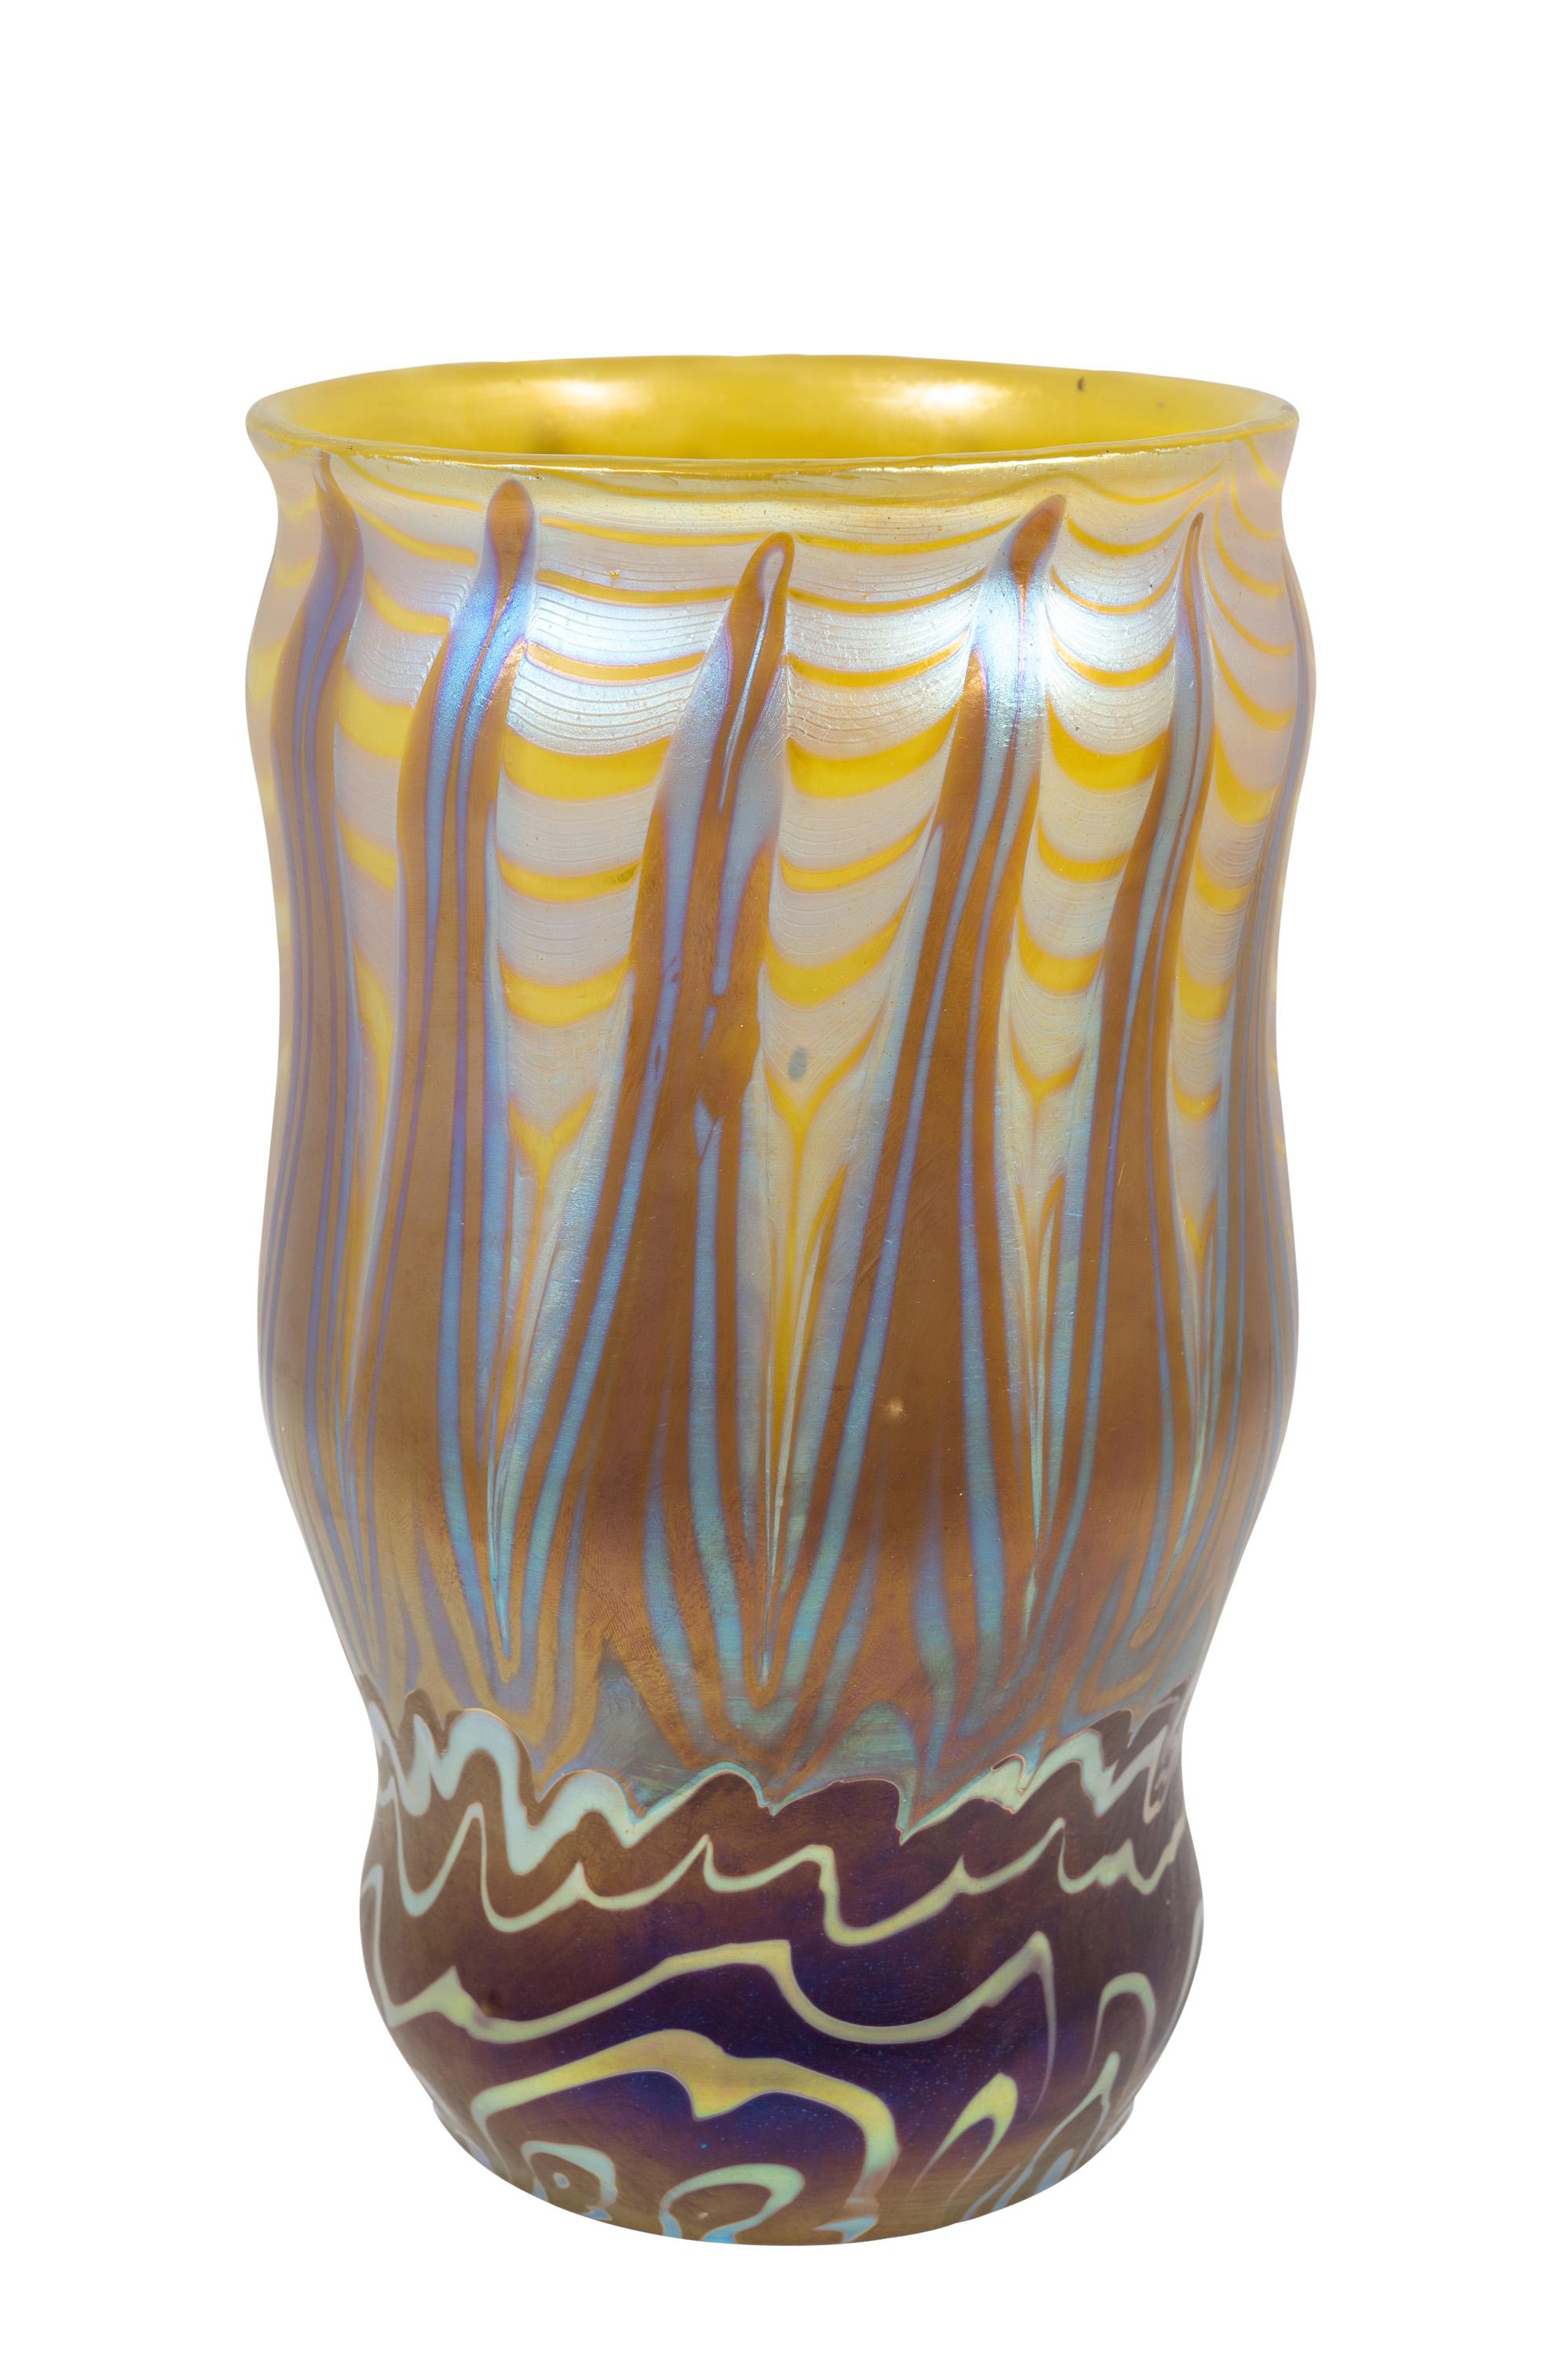 Bohemian glass vase, manufactured by Johann Loetz Witwe, PG 356 decoration, ca. 1900, Brown, Silver, Yellow, Blue, Viennese Art Nouveau, Jugendstil, Art Deco, art glass, iridescent glass.

Technique and material: Glass, mould-blown and freeform,